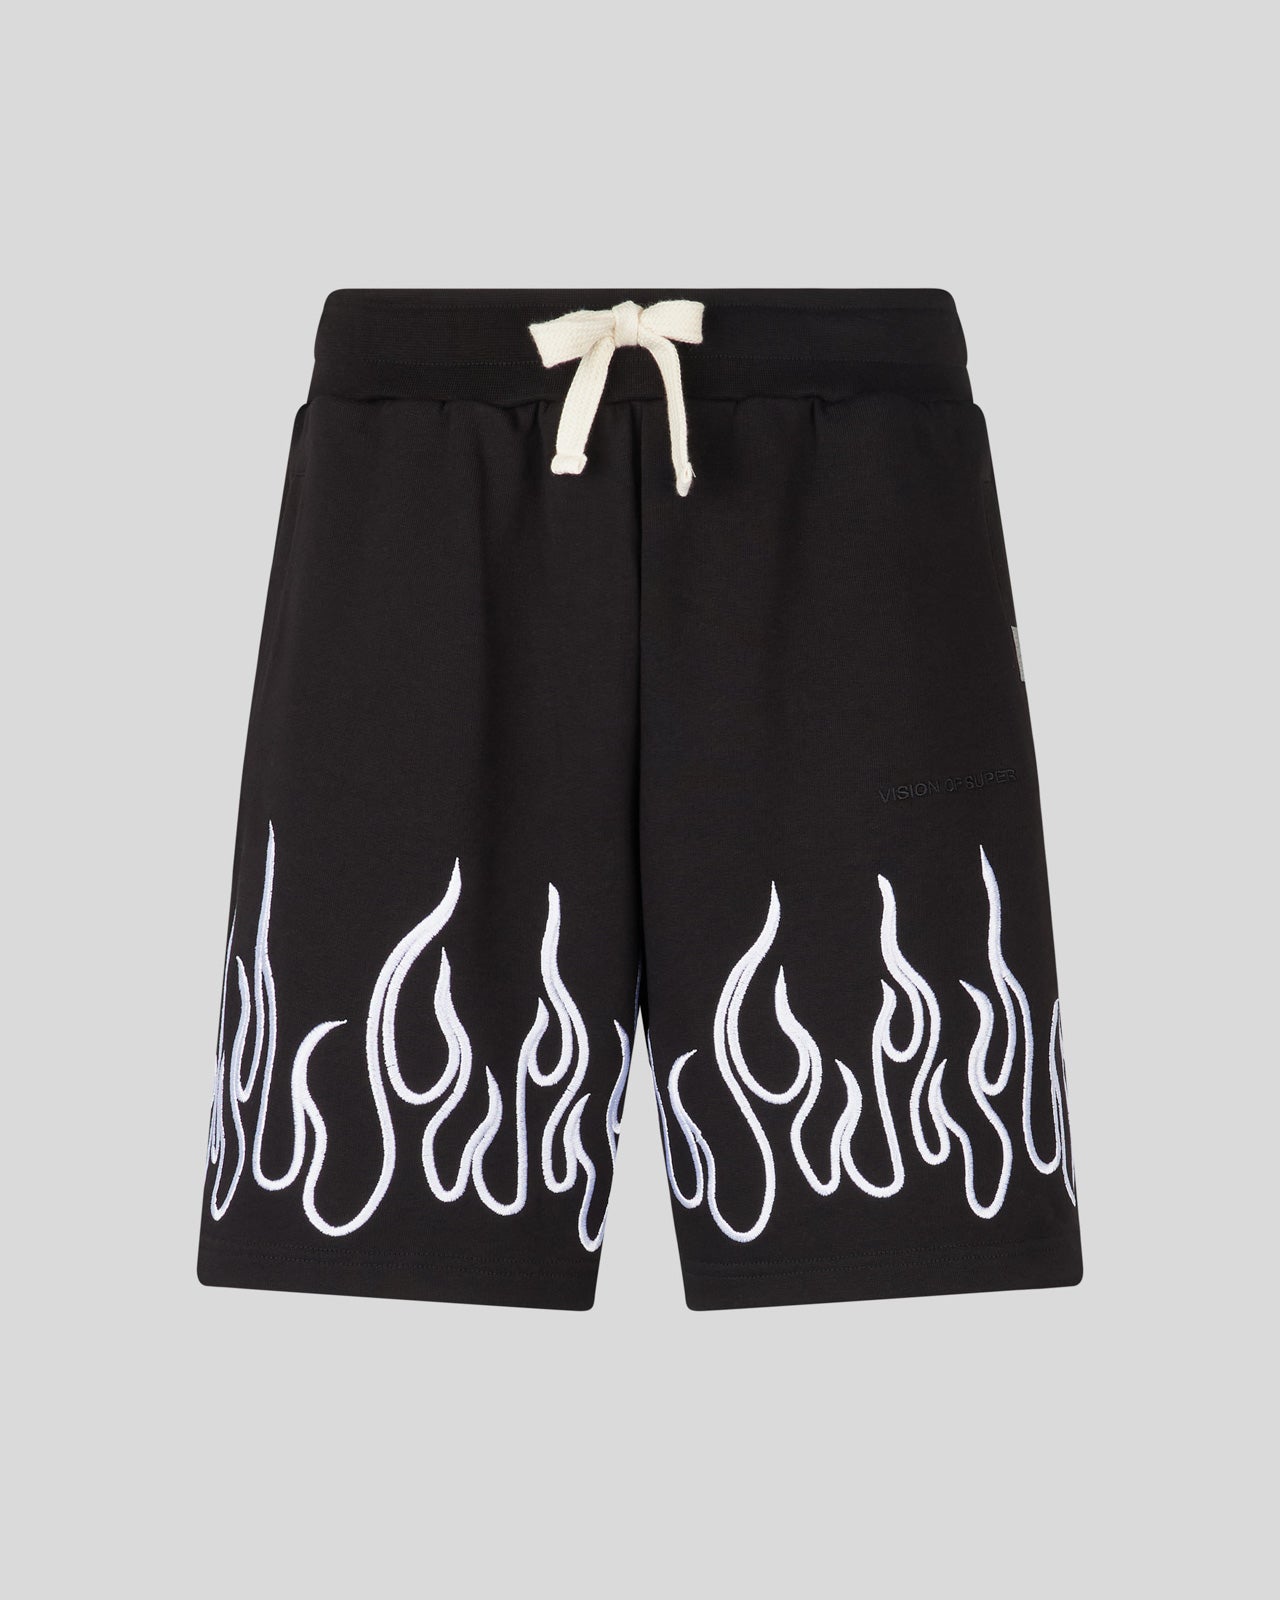 BLACK SHORTS WITH EMBROIDERED WHITE FLAMES